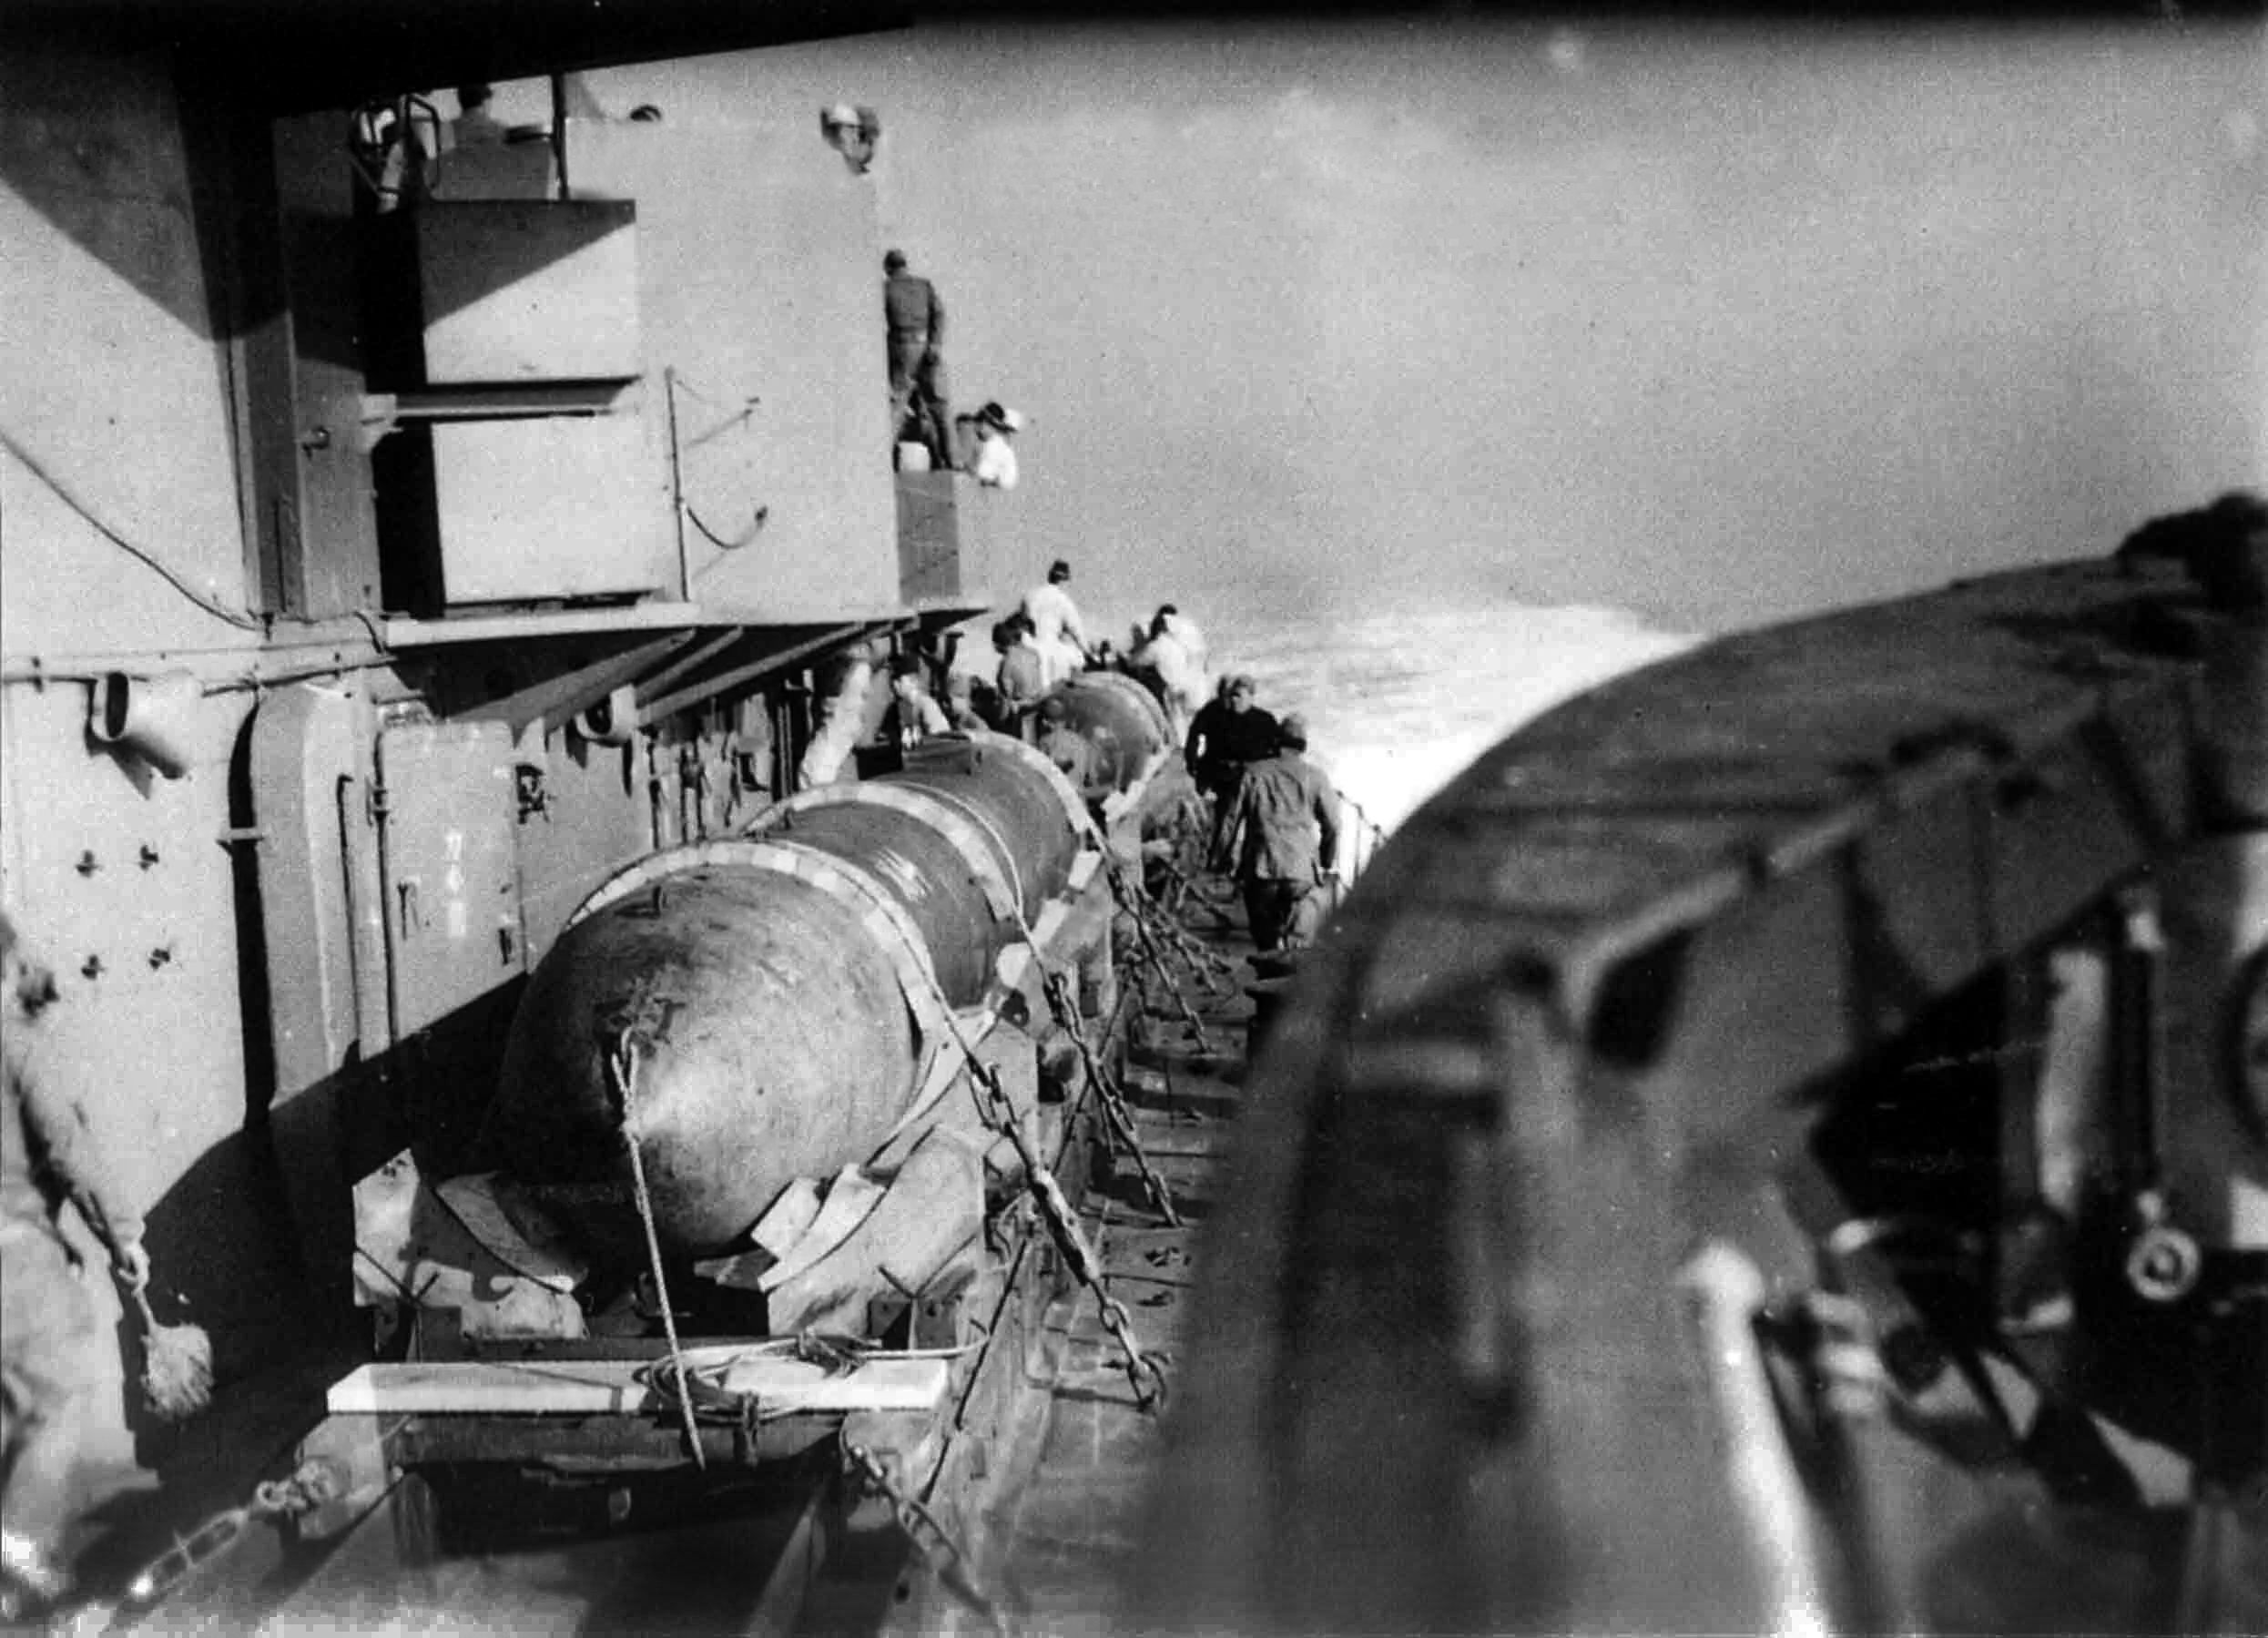 Sailors prepare the Kaiten—modified torpedoes—for an attack. Imperial Japanese Navy submarines equiped with Kaiten typically carried four of the piloted mini-subs.